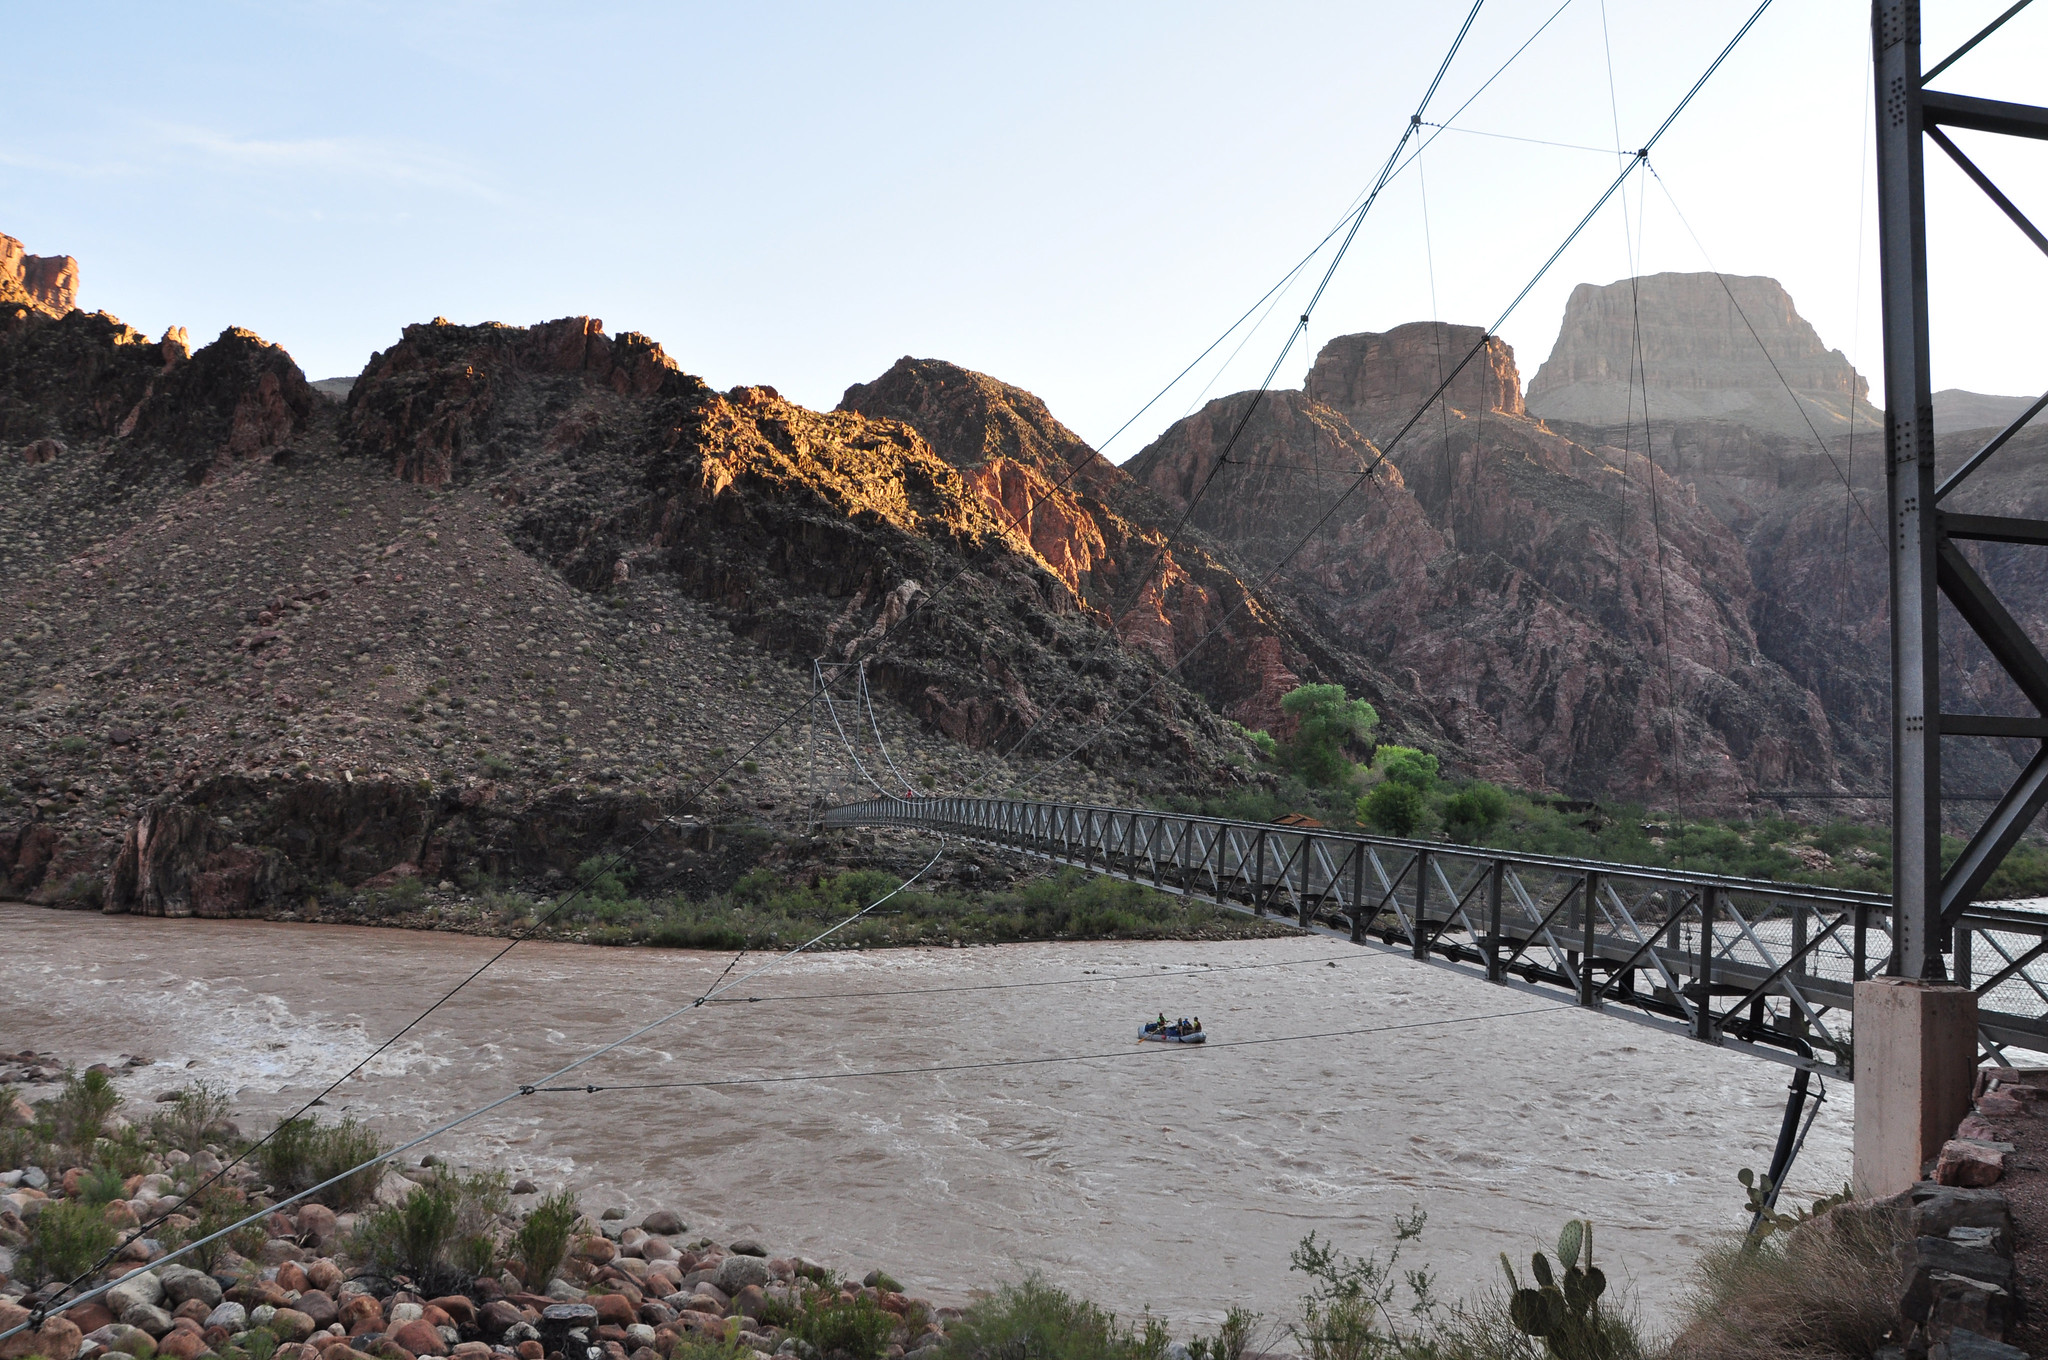 Boaters on the Colorado River pass under the Silver Bridge while getting an early start on their day's journey. NPS Photo by Erin Whittaker.